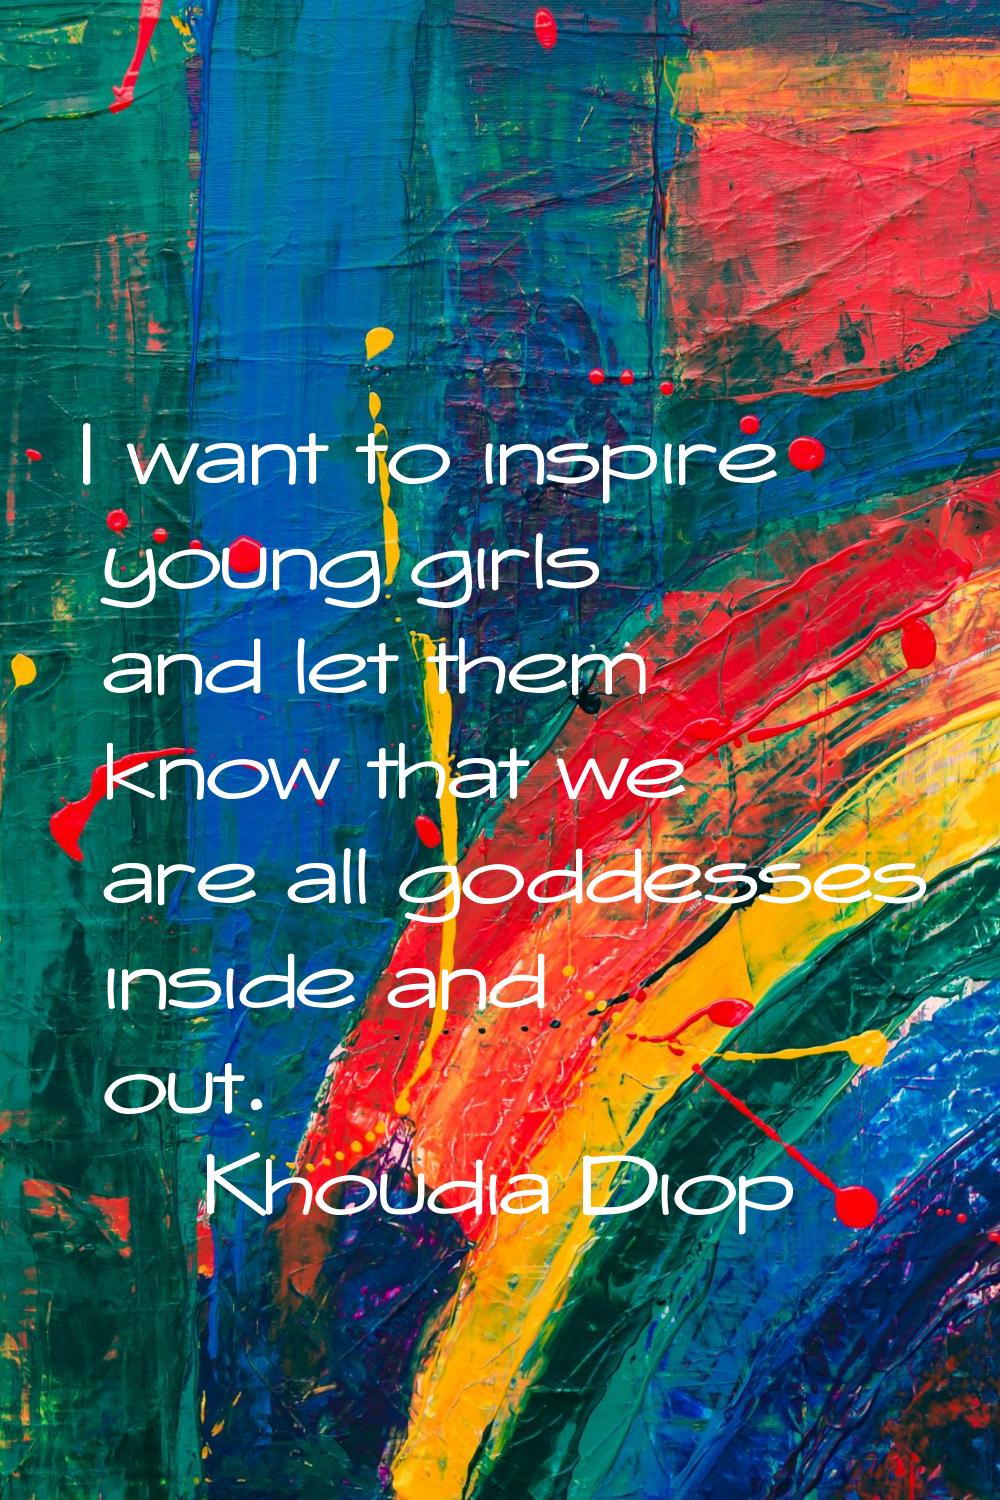 I want to inspire young girls and let them know that we are all goddesses inside and out.